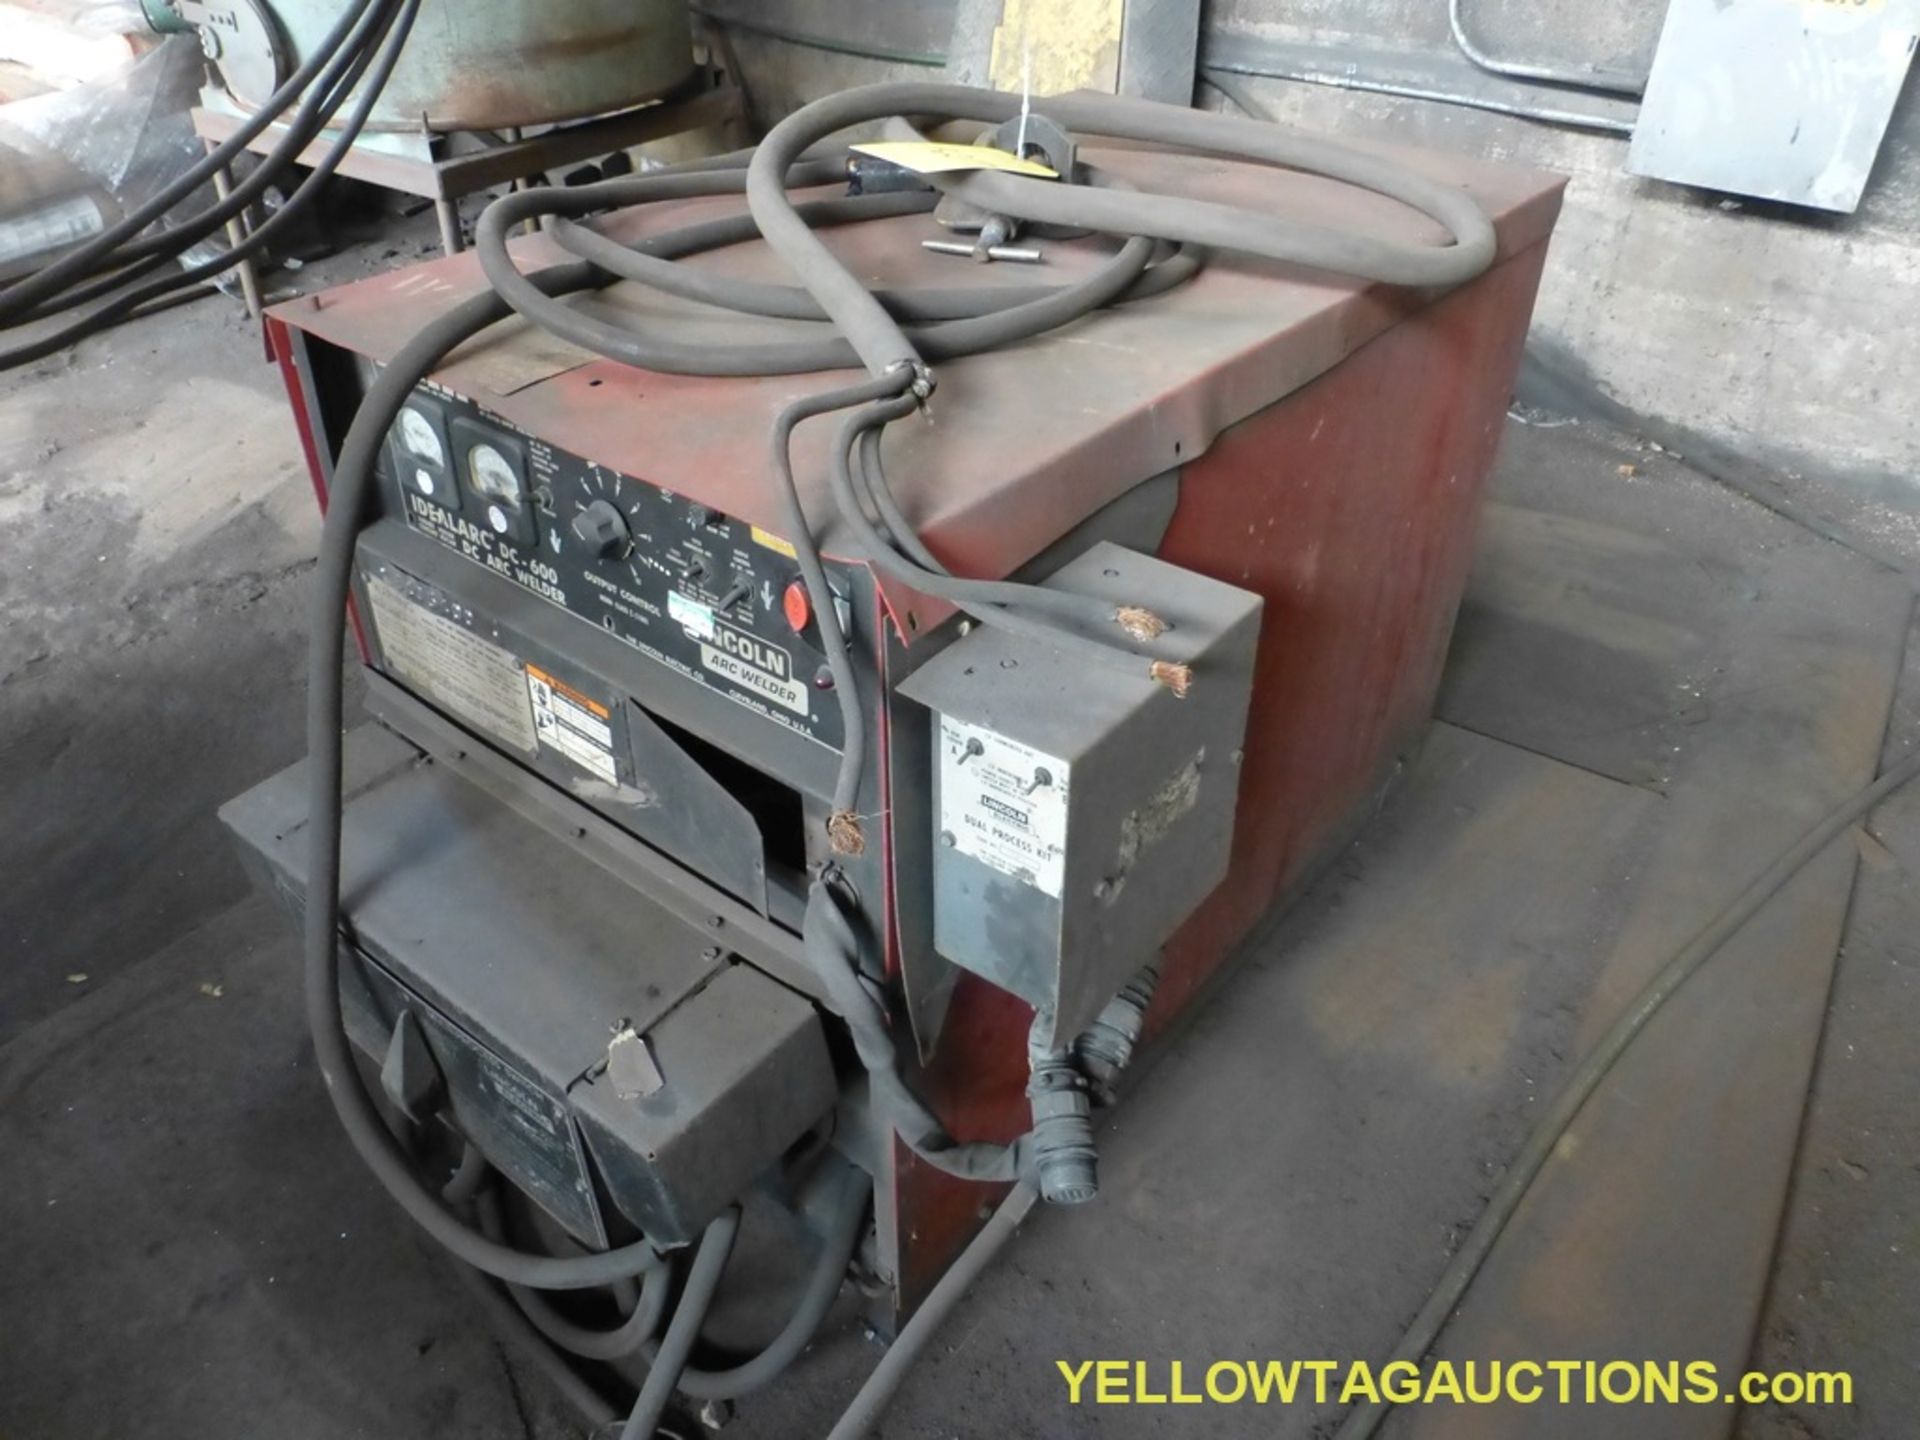 Lot of (2) Lincoln Electric Components | (1) Ideal Arc DC 600 Arc Welder Model No. DC600, Code No. 9